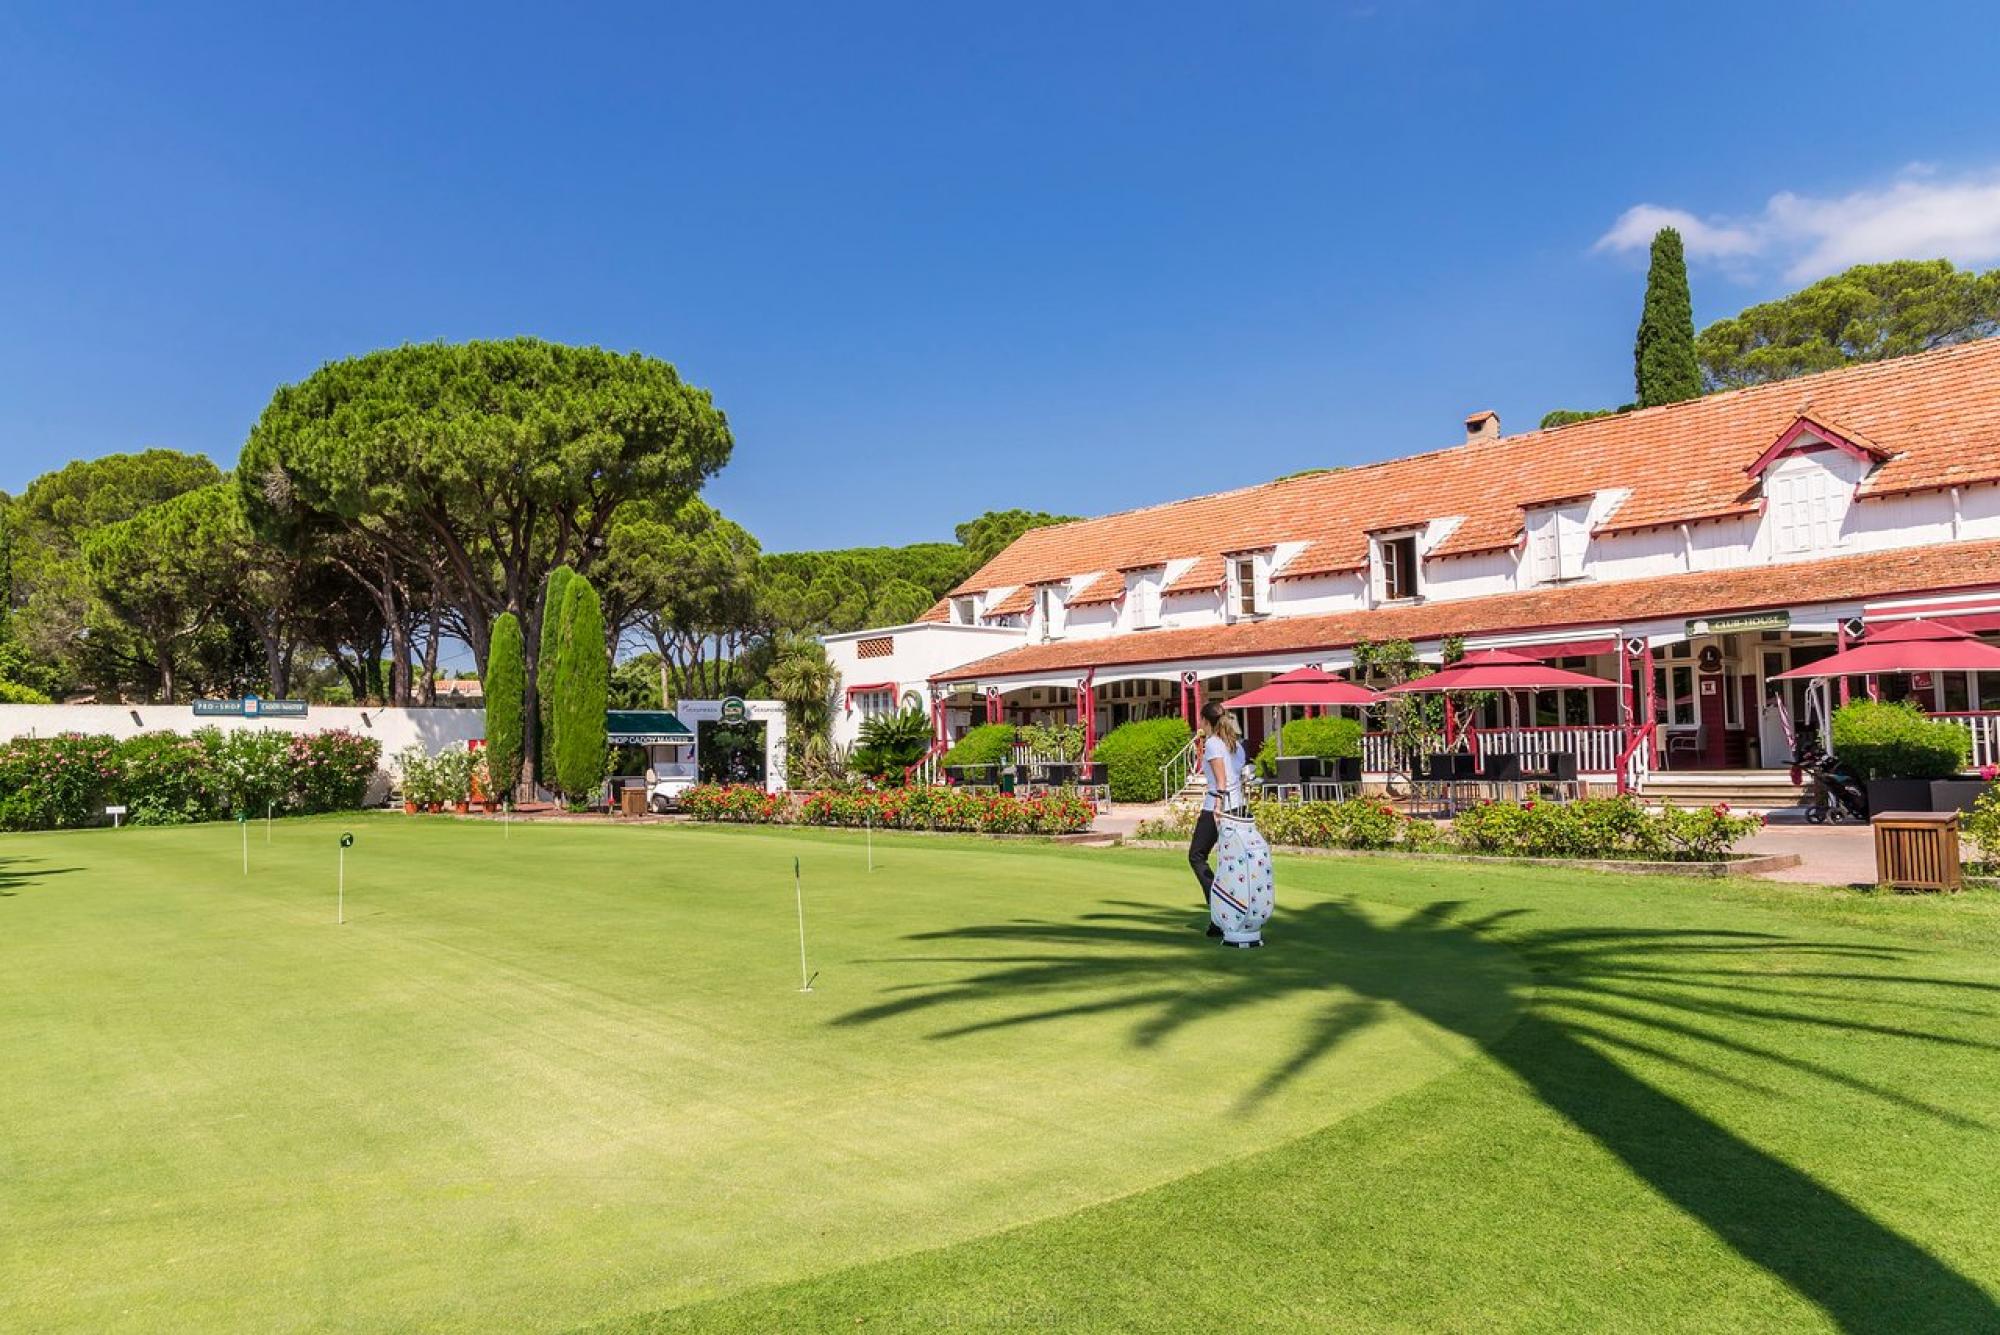 All The Golf de Valescure's beautiful golf course in striking South of France.